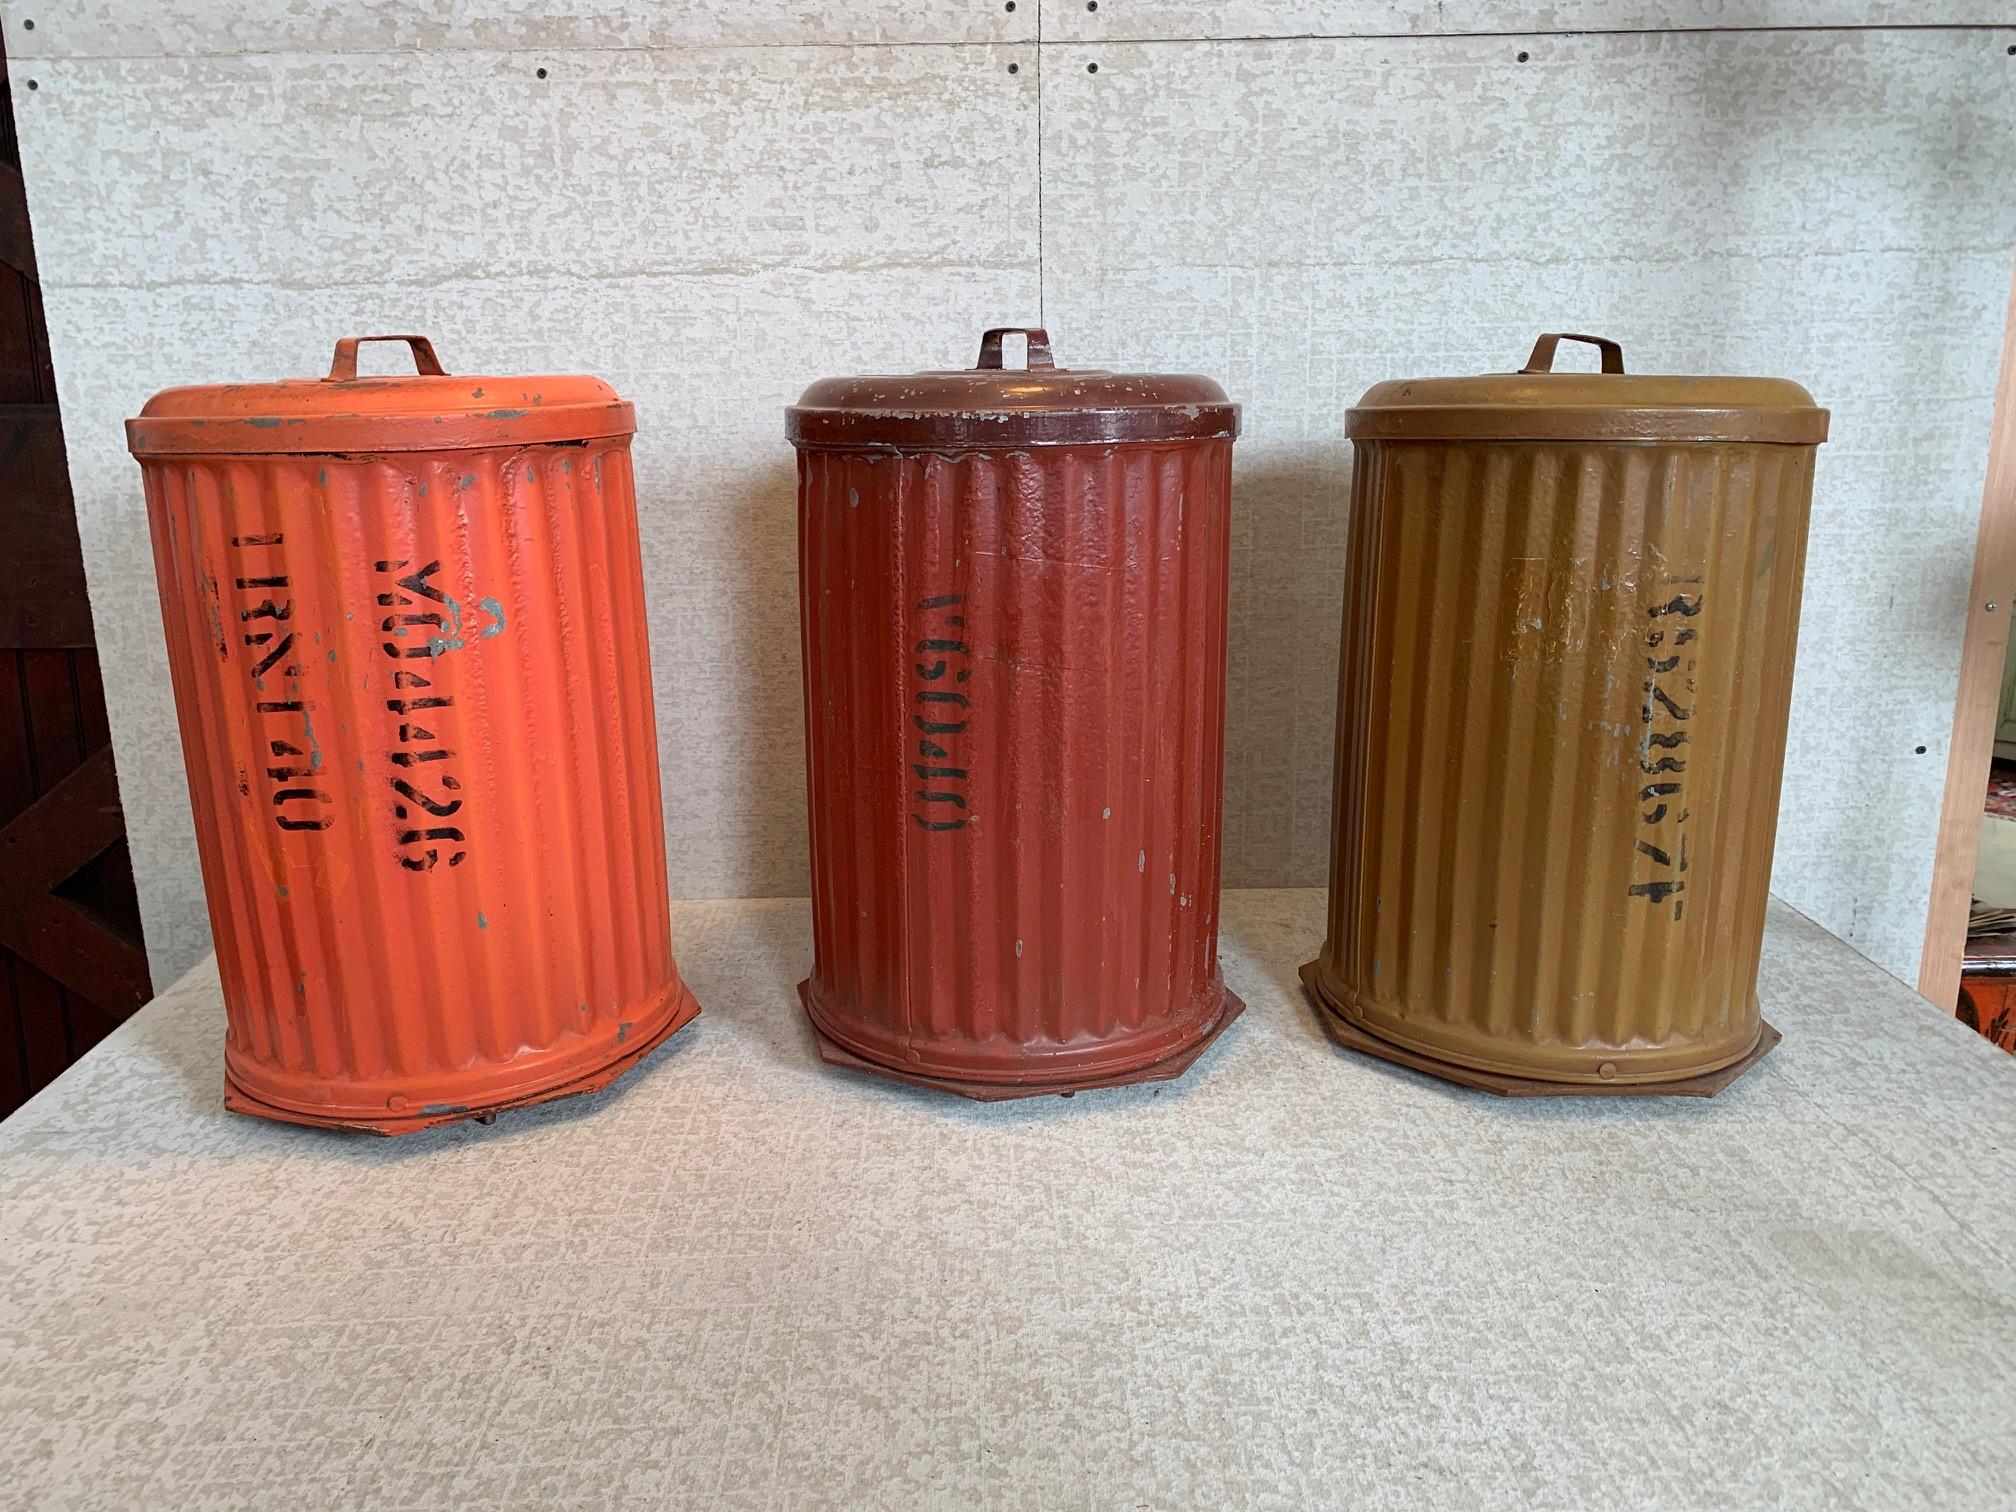 Painted in various colors, these corrugated, galvanized pigment cans were salvaged from an Eastern PA paint company established in 1878. Perfect size and form provides a multitude of storage solutions. Close fitting lids keep the elements out and